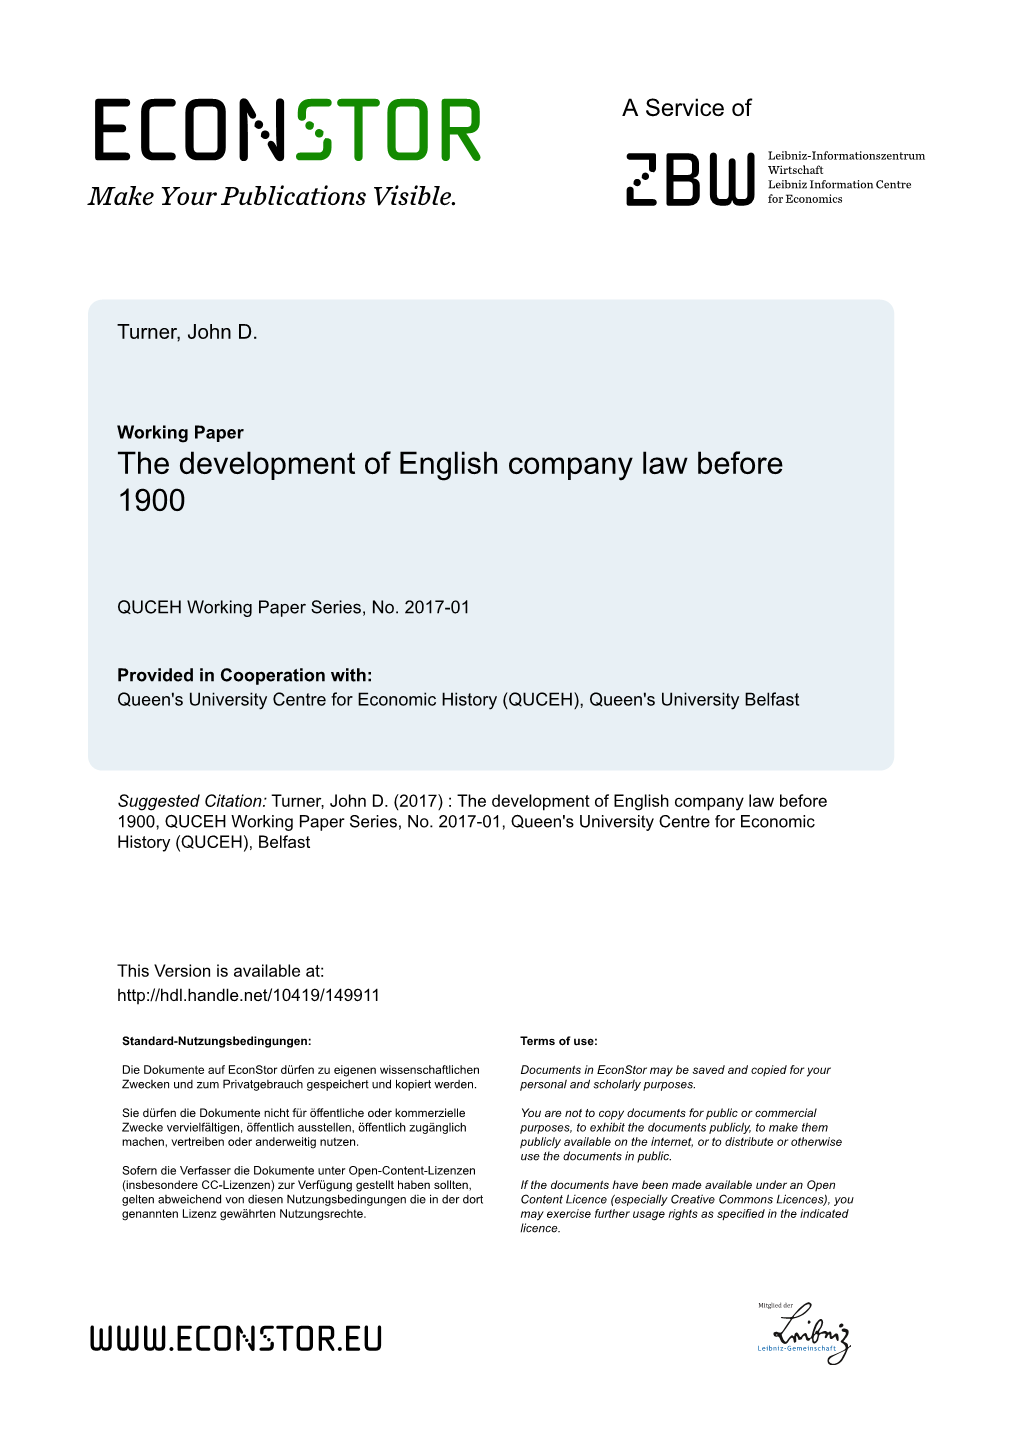 The Development of English Company Law Before 1900